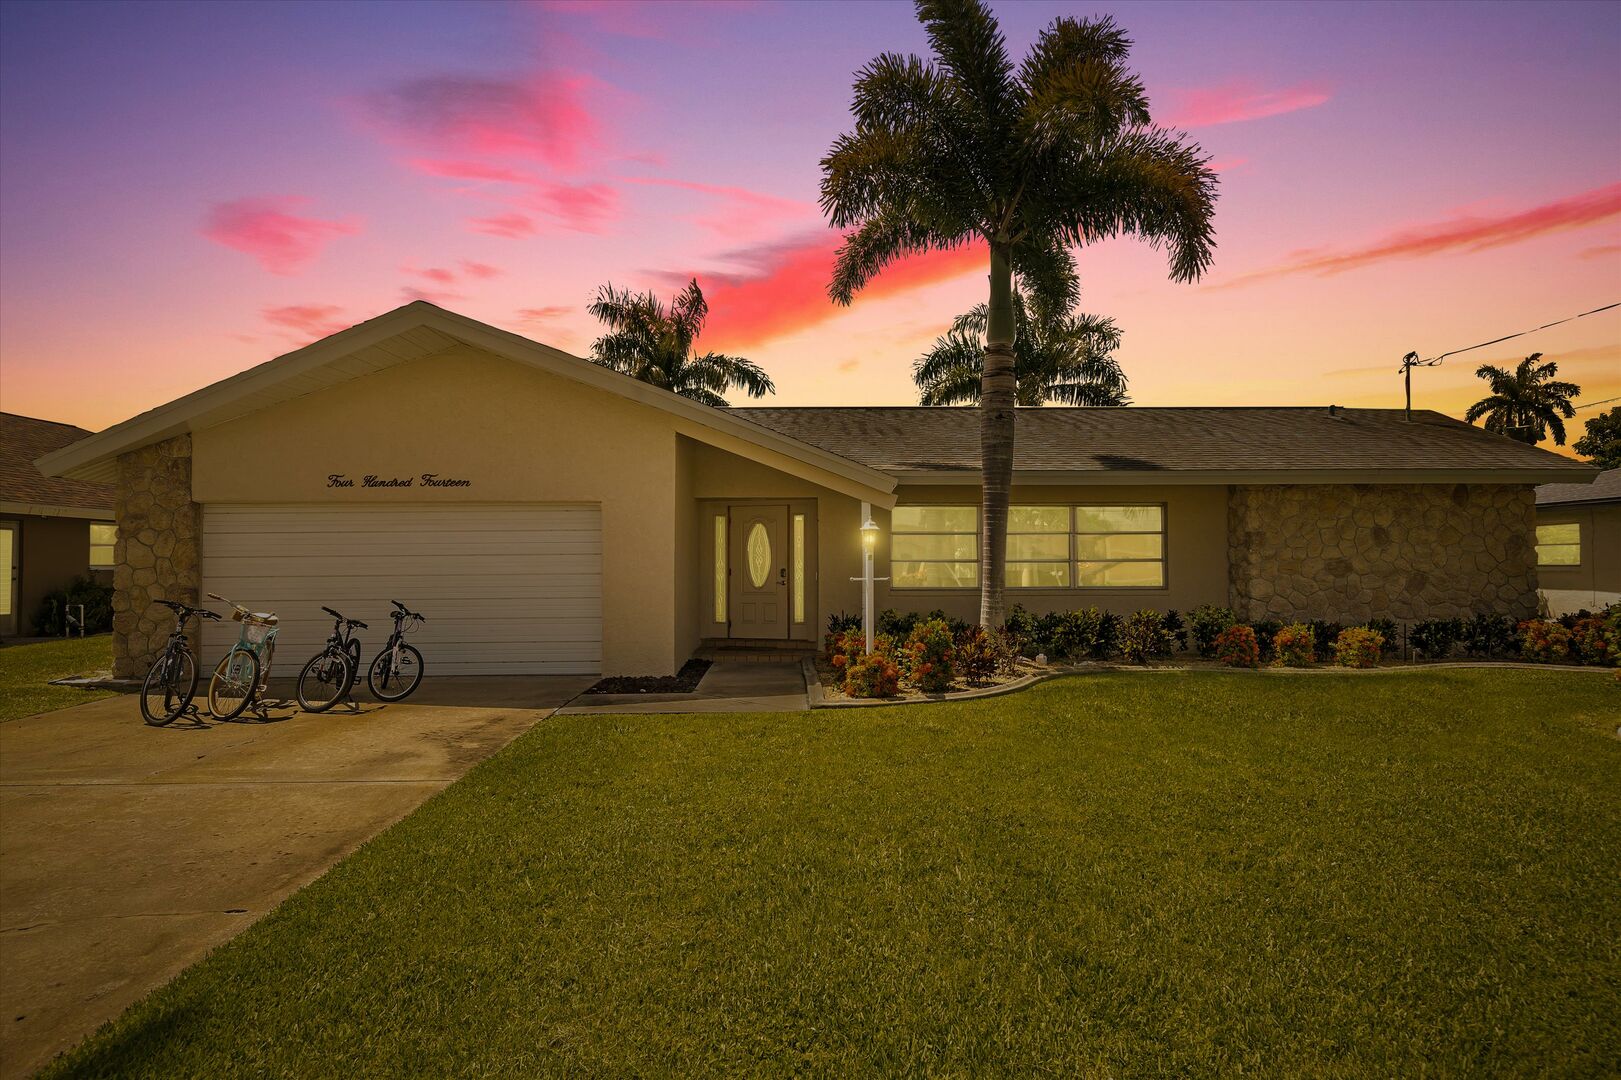 Cape Coral Vacation Home with bikes